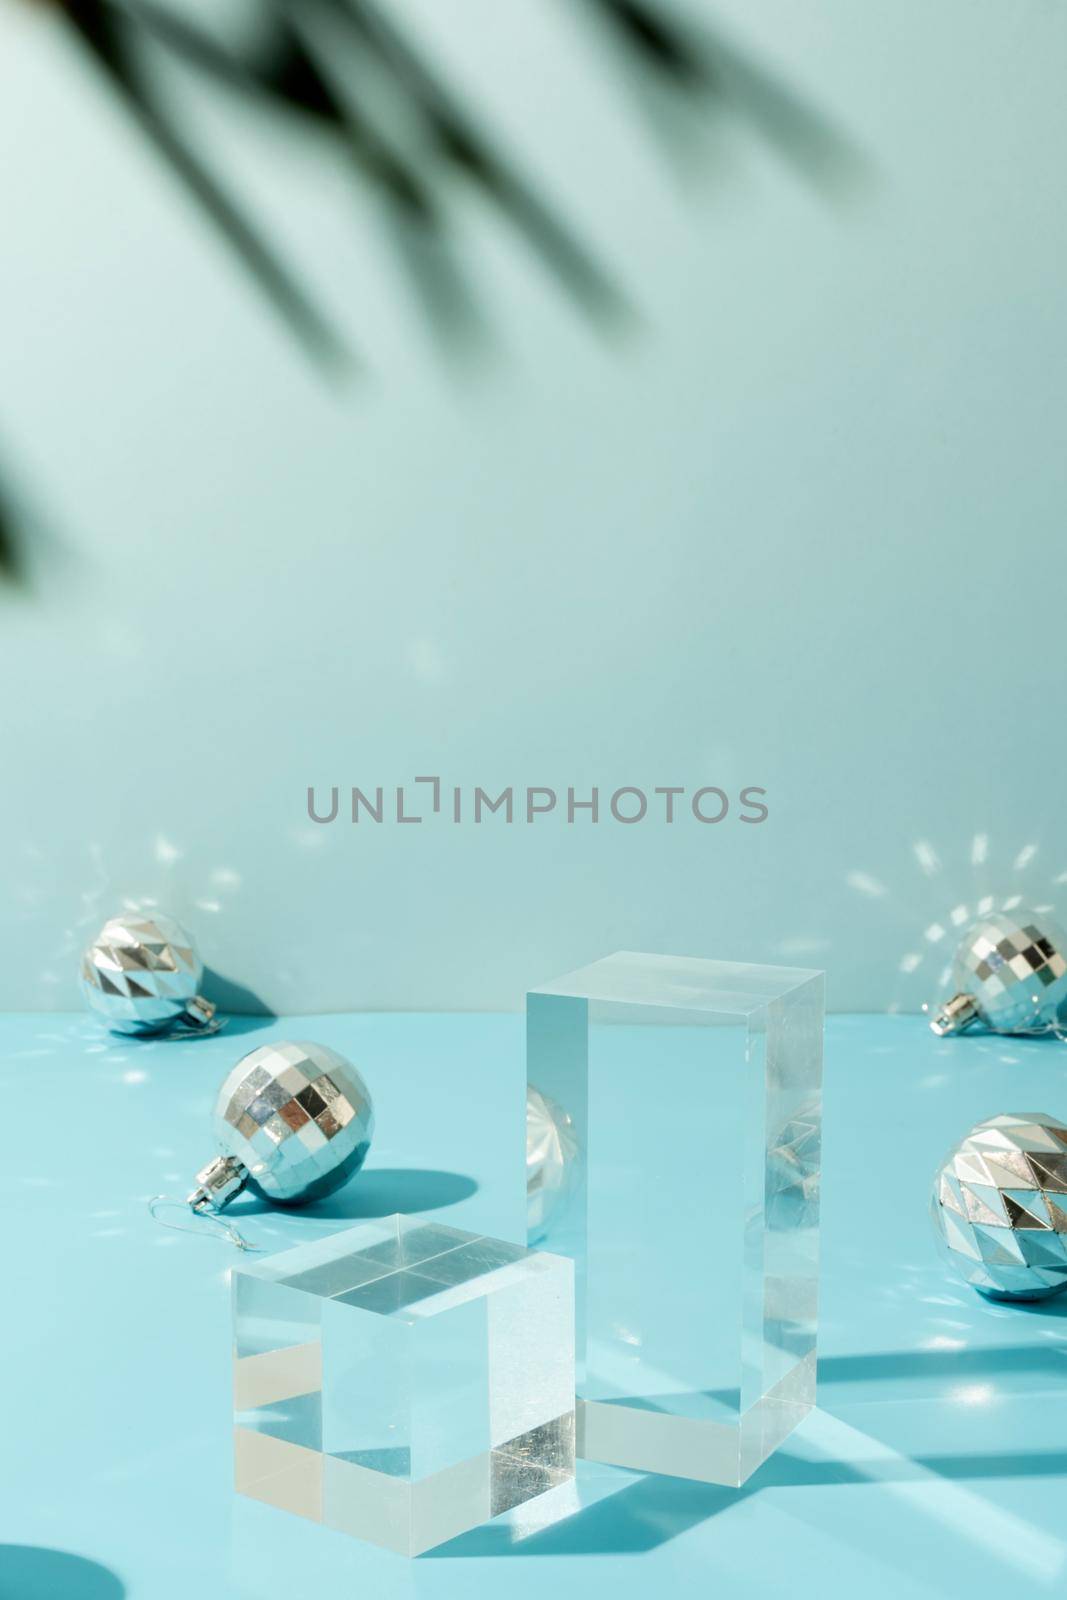 A minimalistic scene of glass podium with christmas decorative balls and pine tree on a light blue background by Desperada